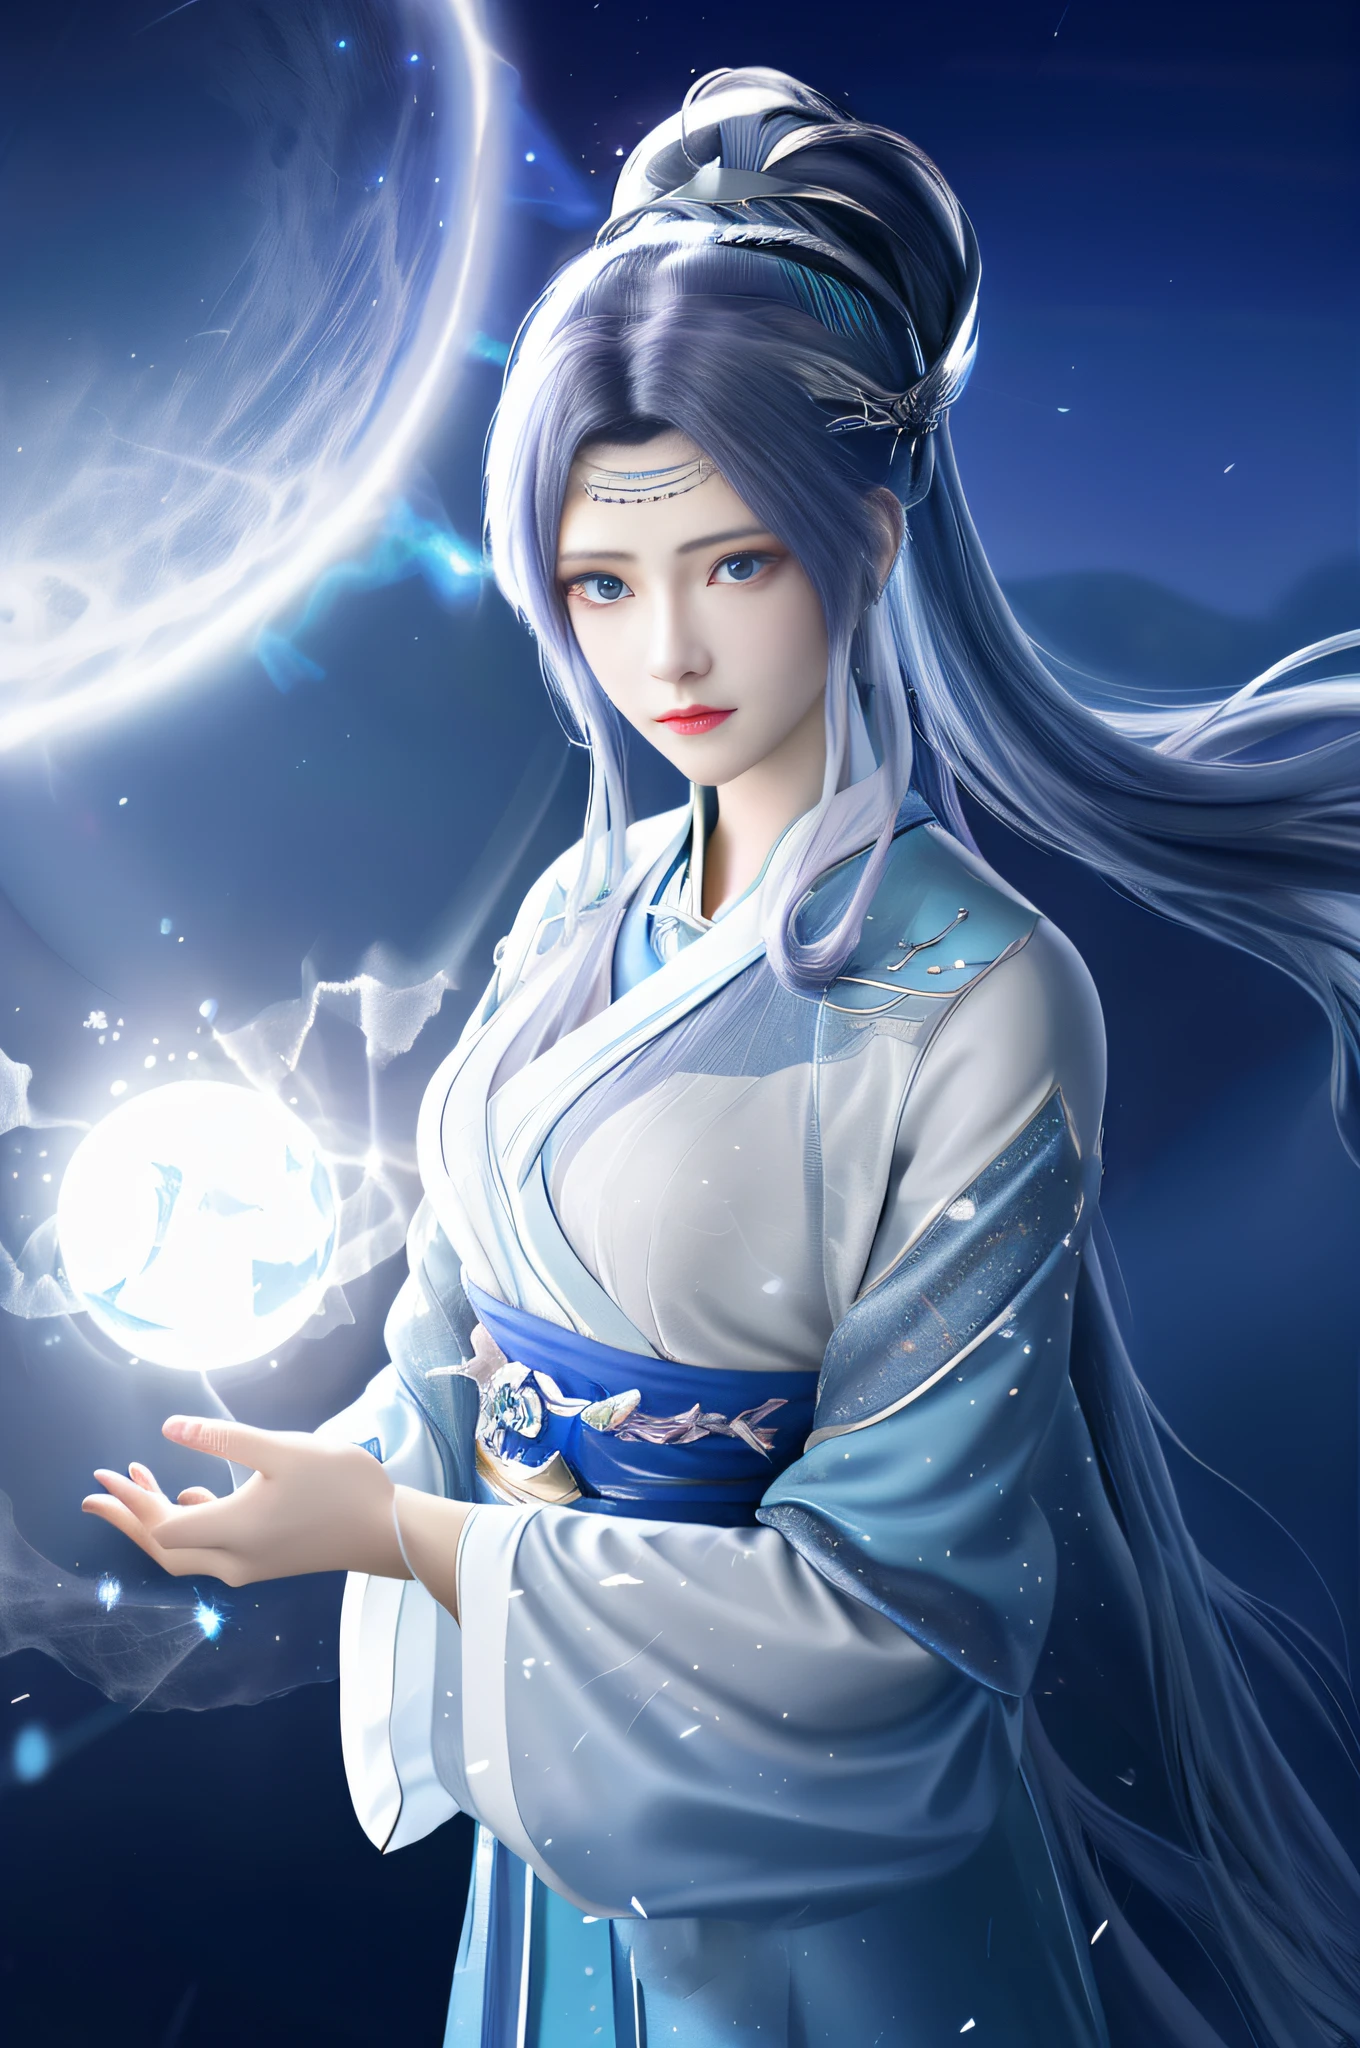 Anime girl with blue hair and white dress holding a glowing ball, Beautiful celestial mage, Palace ， A girl in Hanfu, heise jinyao, inspired by Lü Ji, inspired by Leng Mei, inspired by Xie Sun, inspired by Hua Yan, xianxia fantasy, Inspired by Ai Xuan, inspired by Li Mei-shu, lunar goddess，1girll, 独奏, Chiffon hemp, Masterpiece, illustration, Movie Angle, cinmatic lighting, whaite hair, high ponytails, eBlue eyes, Detailed eyes, Moon, Moonlight, starrysky, detailed light, Detailed sky, (lighting particle:1.5), Heavy fog, Snow, ,v4